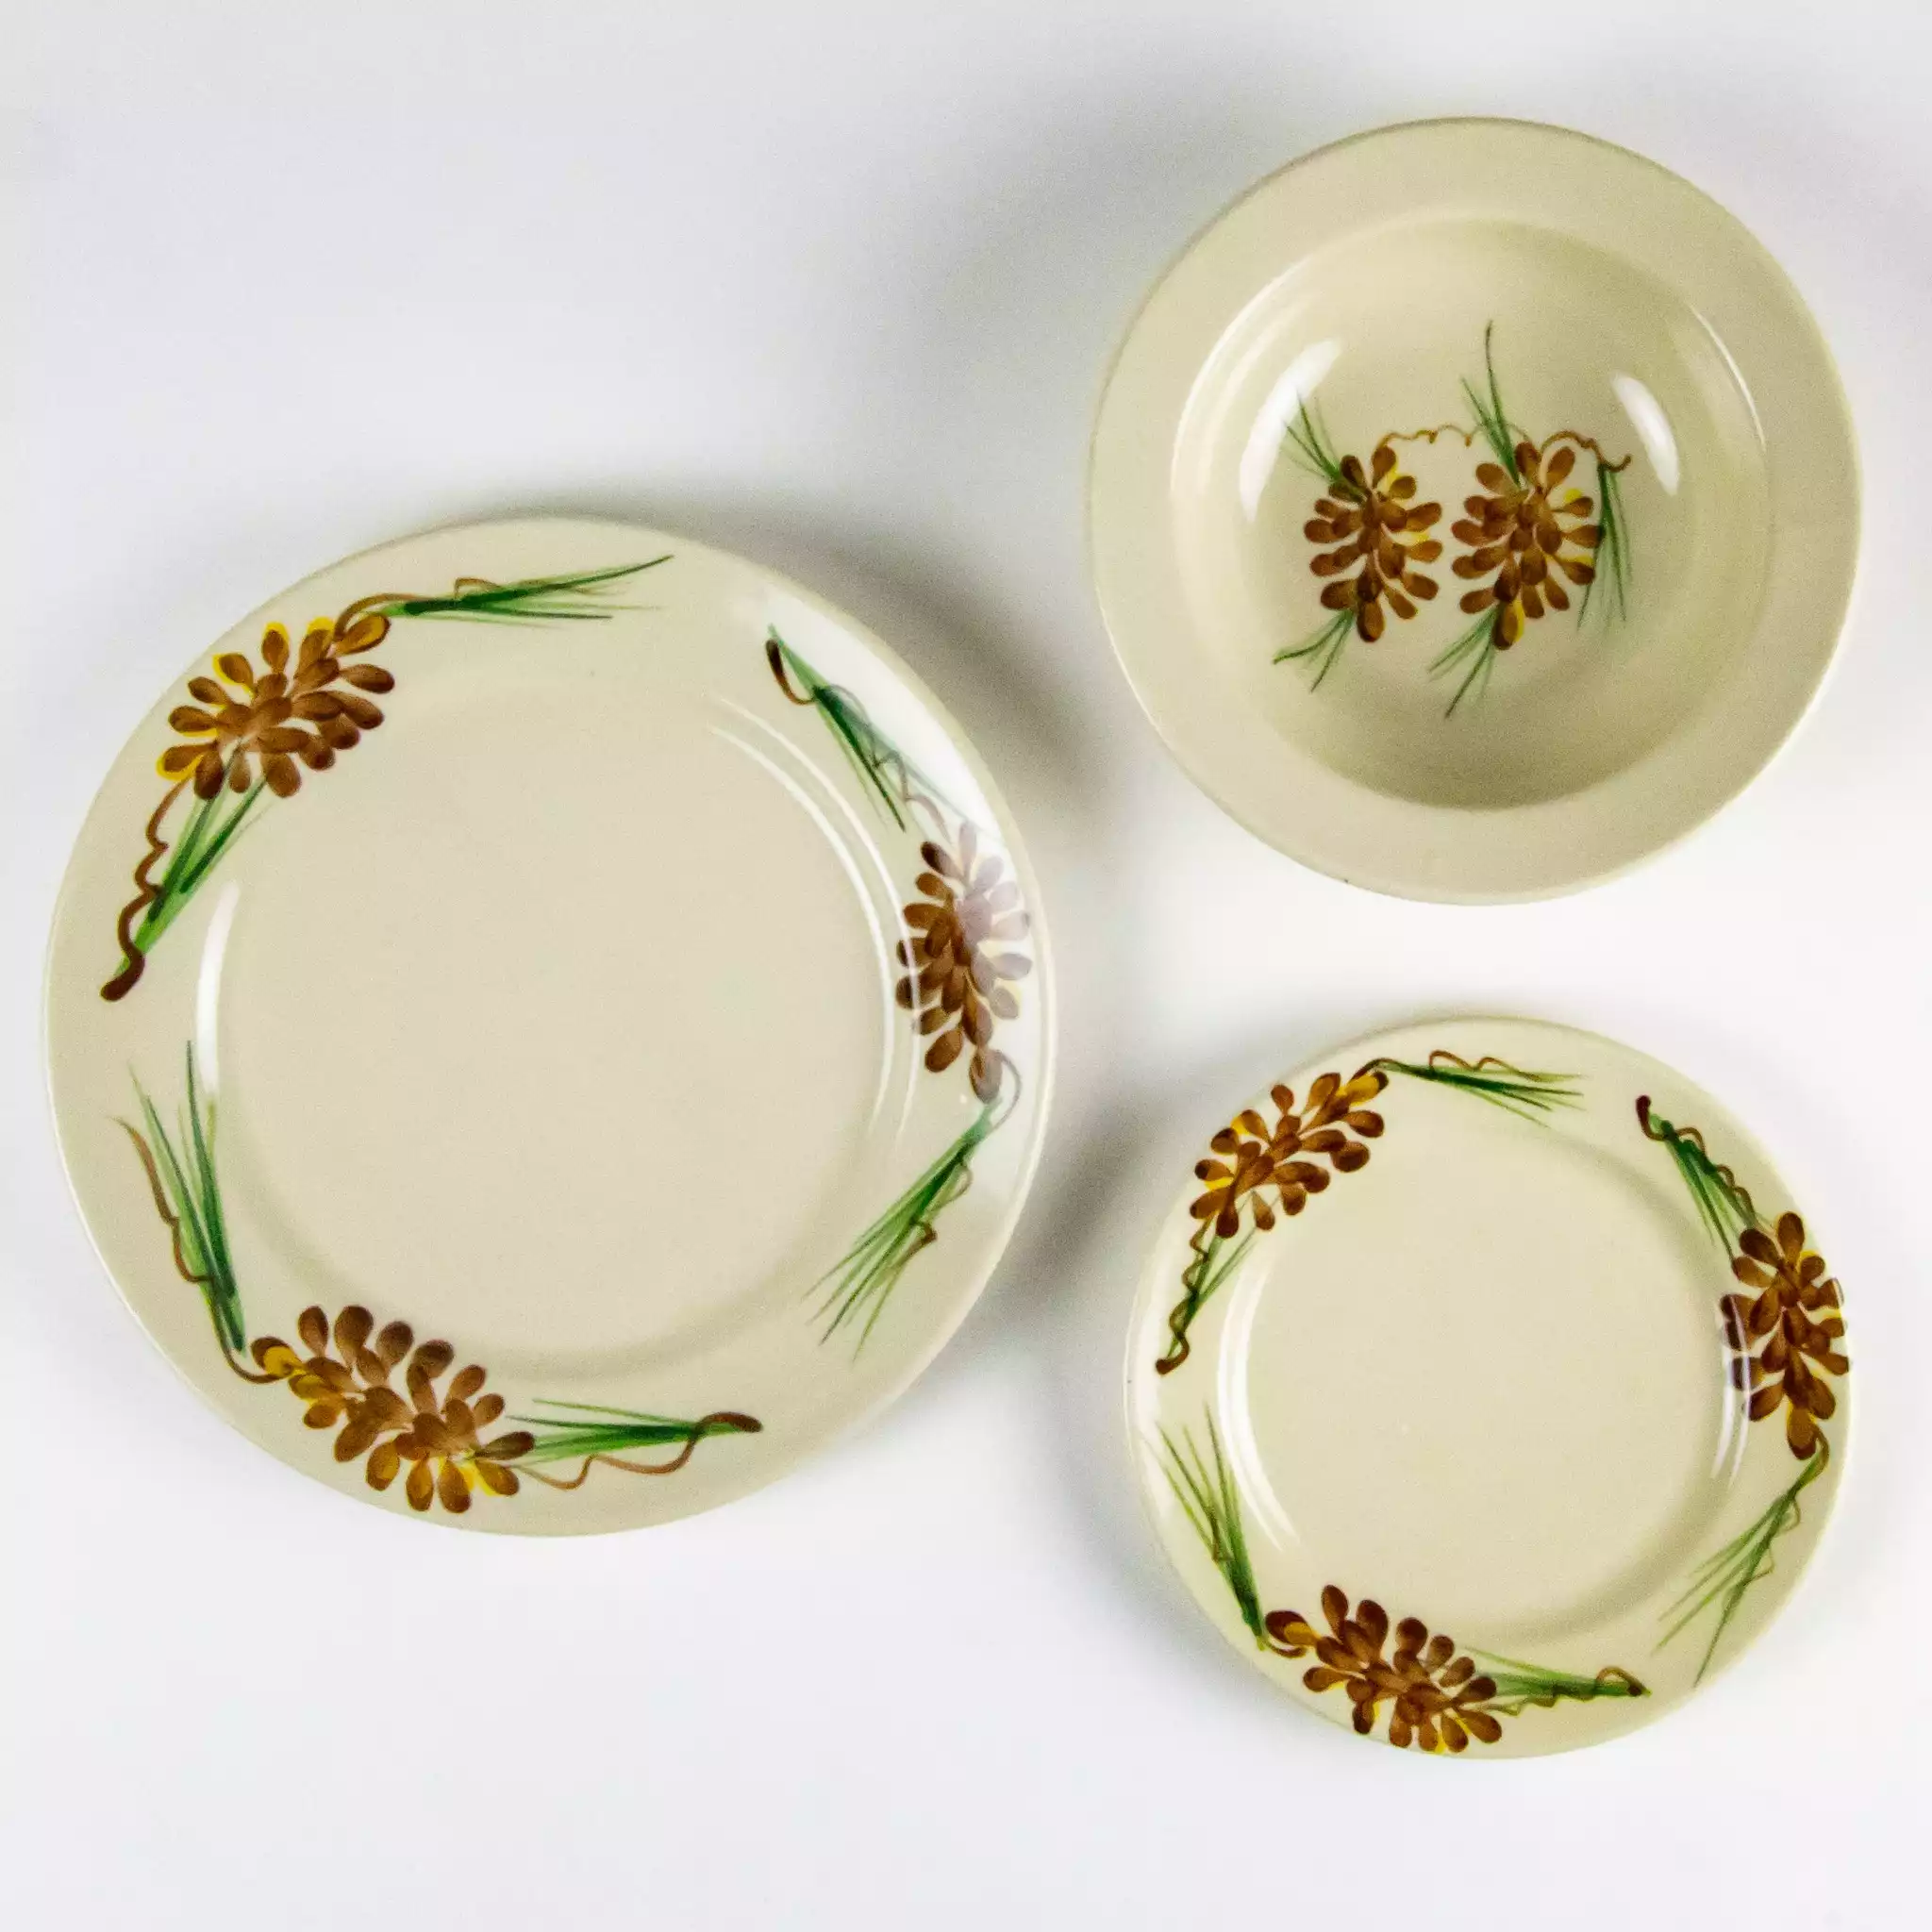 Emerson Creek Pottery Dinnerware Set For One